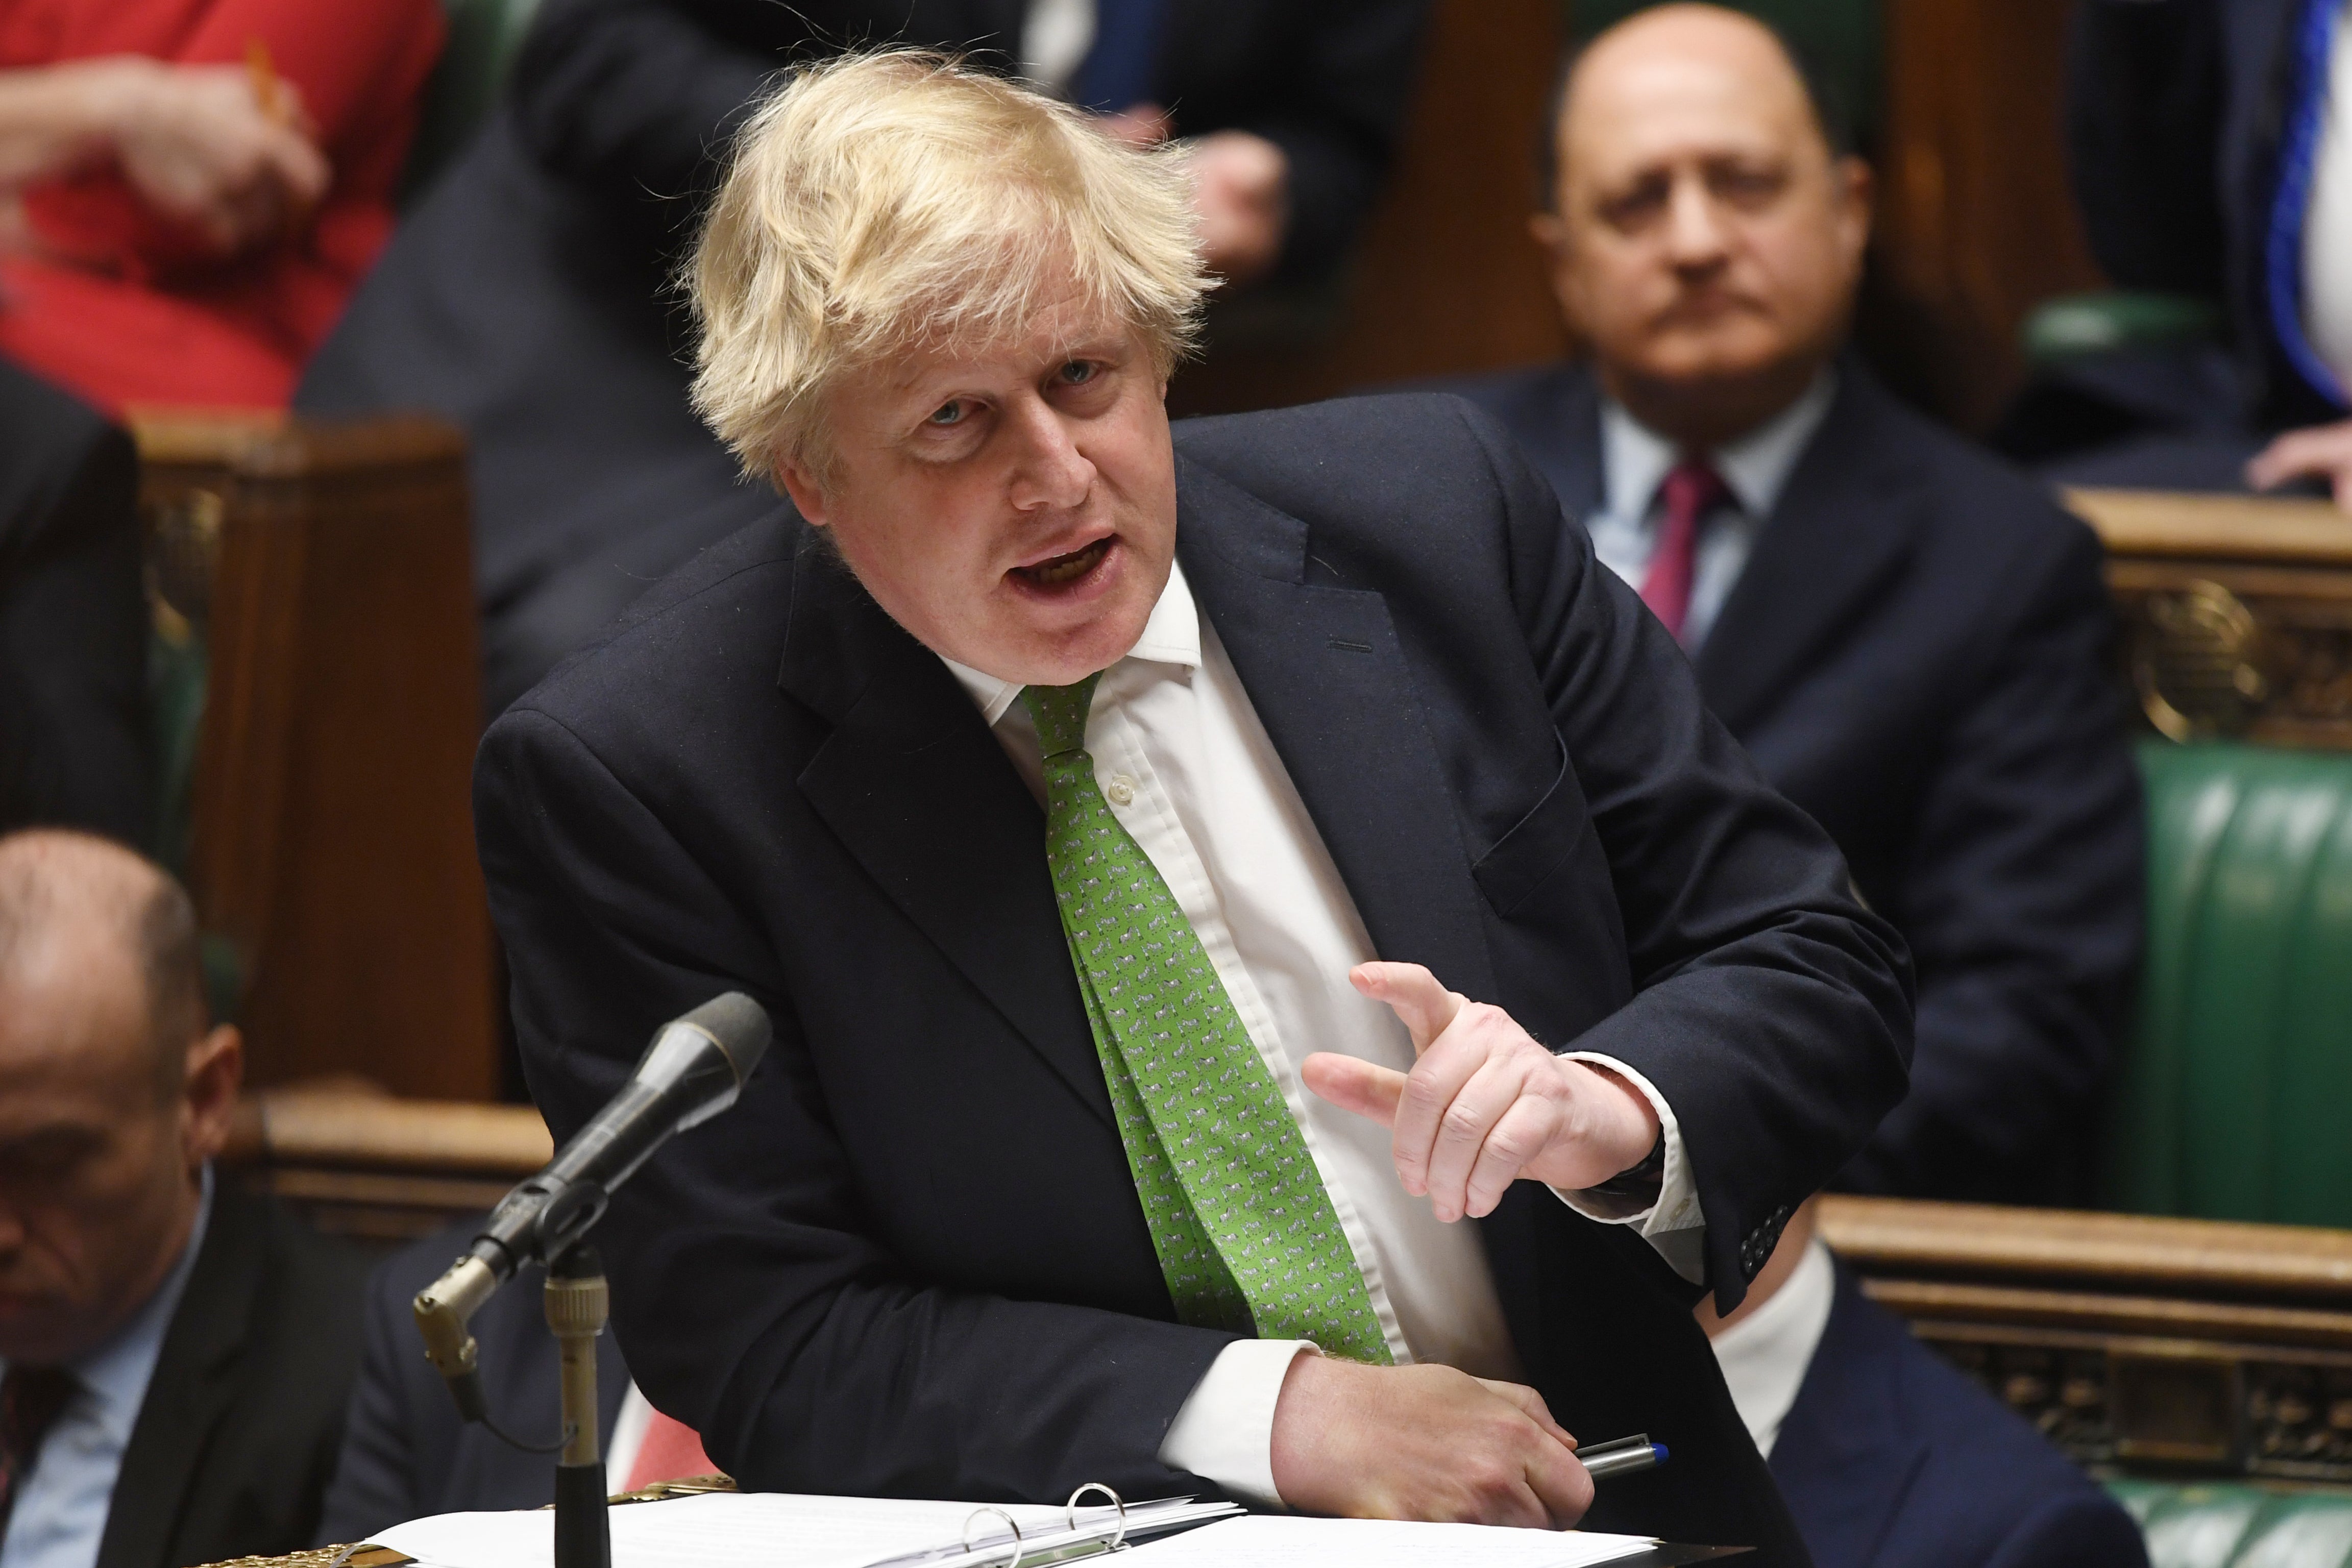 Prime Minister Boris Johnson updating MPs in the House of Commons in London on the latest situation regarding Ukraine (UK Parliament/Jessica Taylor)